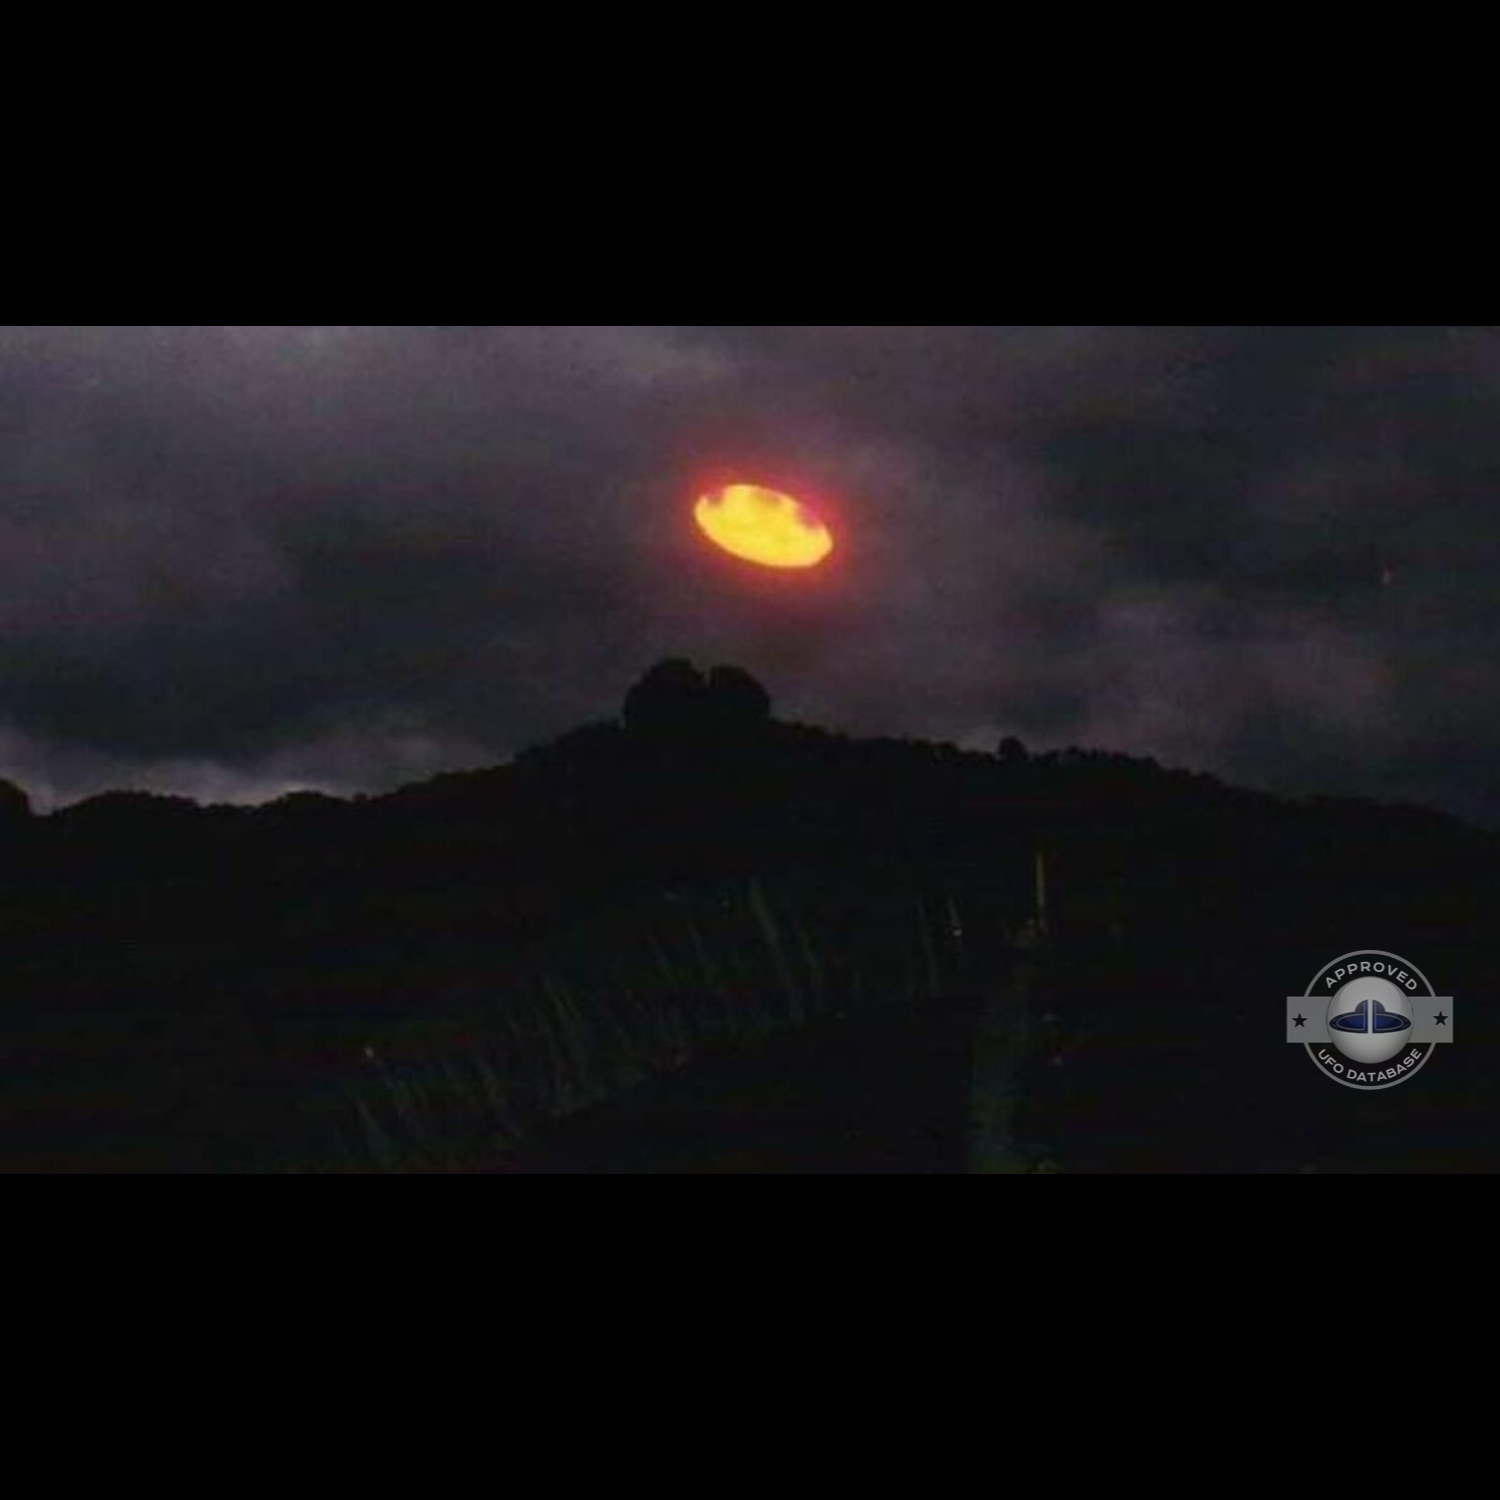 The Carlos Diaz experience is one of the most important UFO sighting UFO Picture #137-1